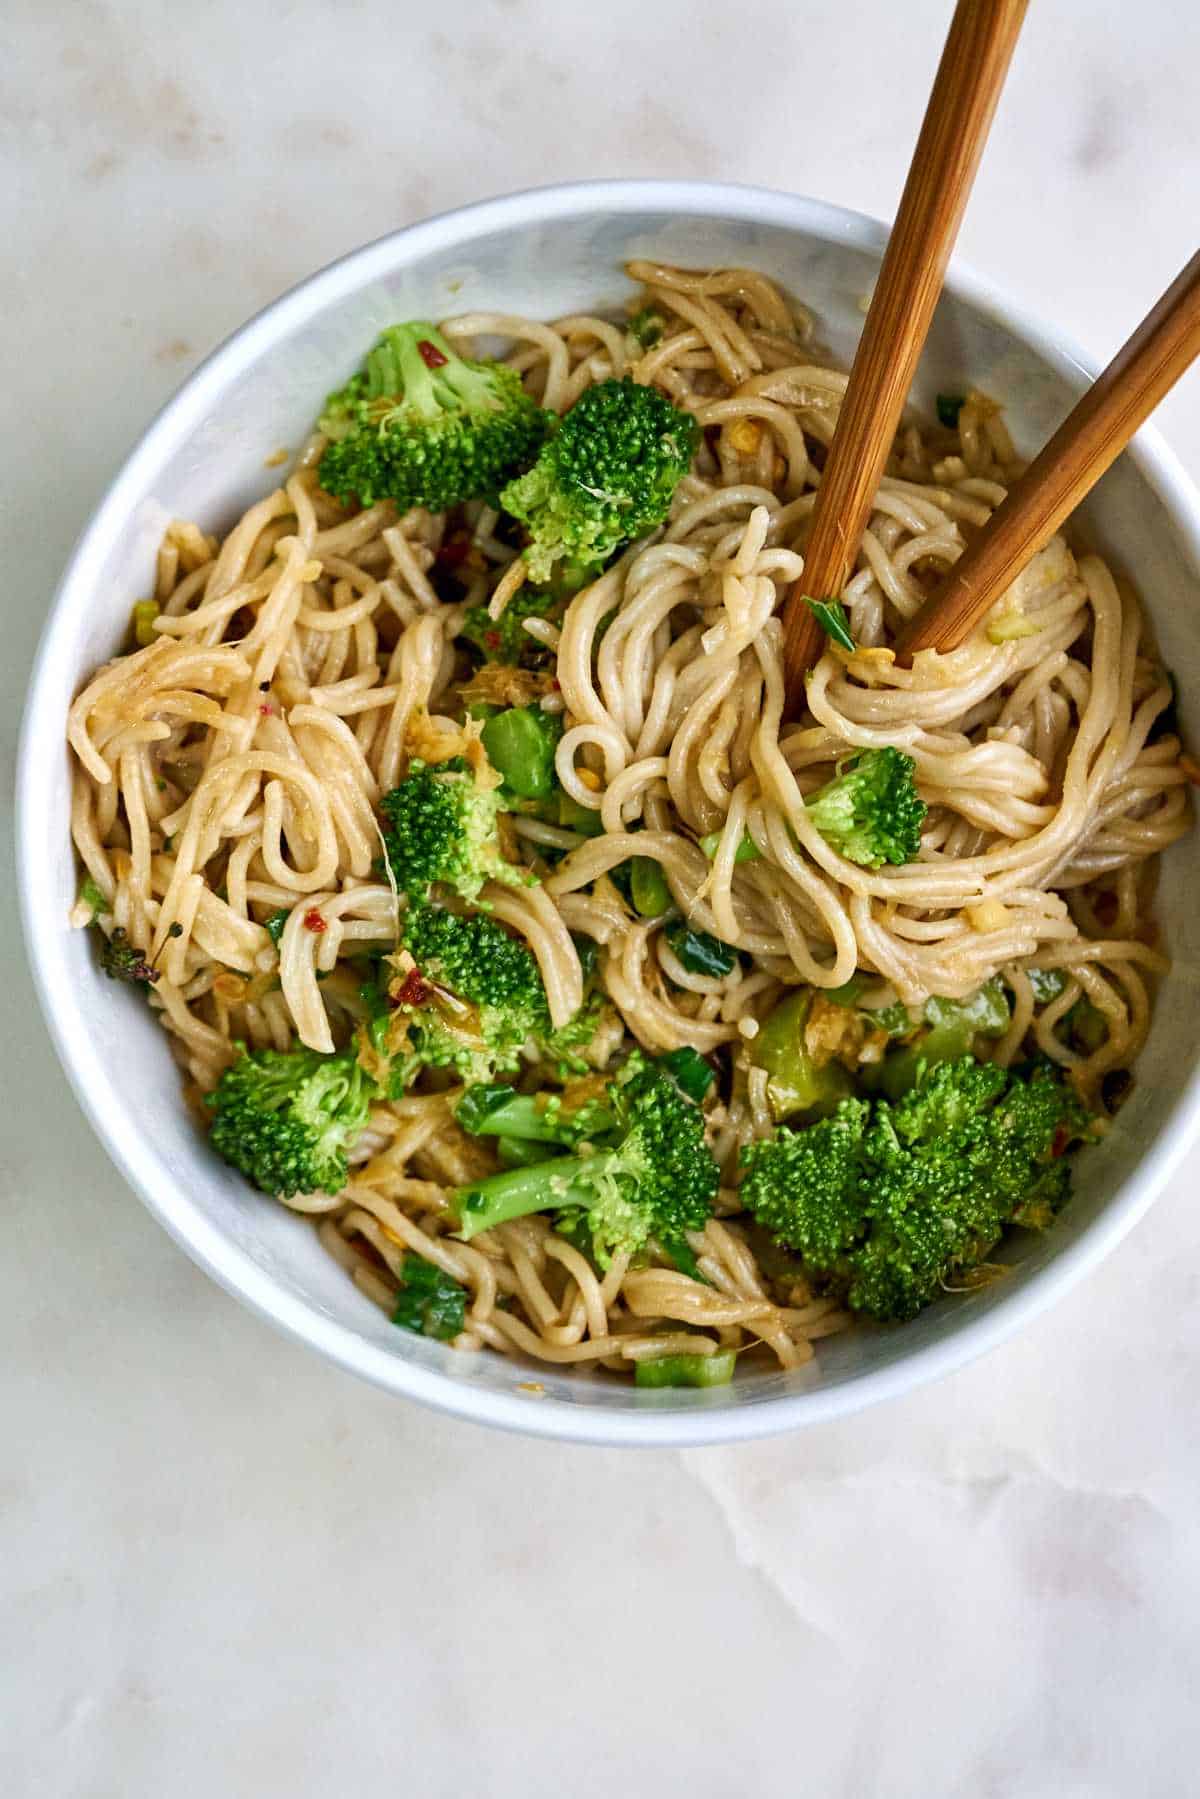 Noodles and broccoli in a bowl with chopsticks.